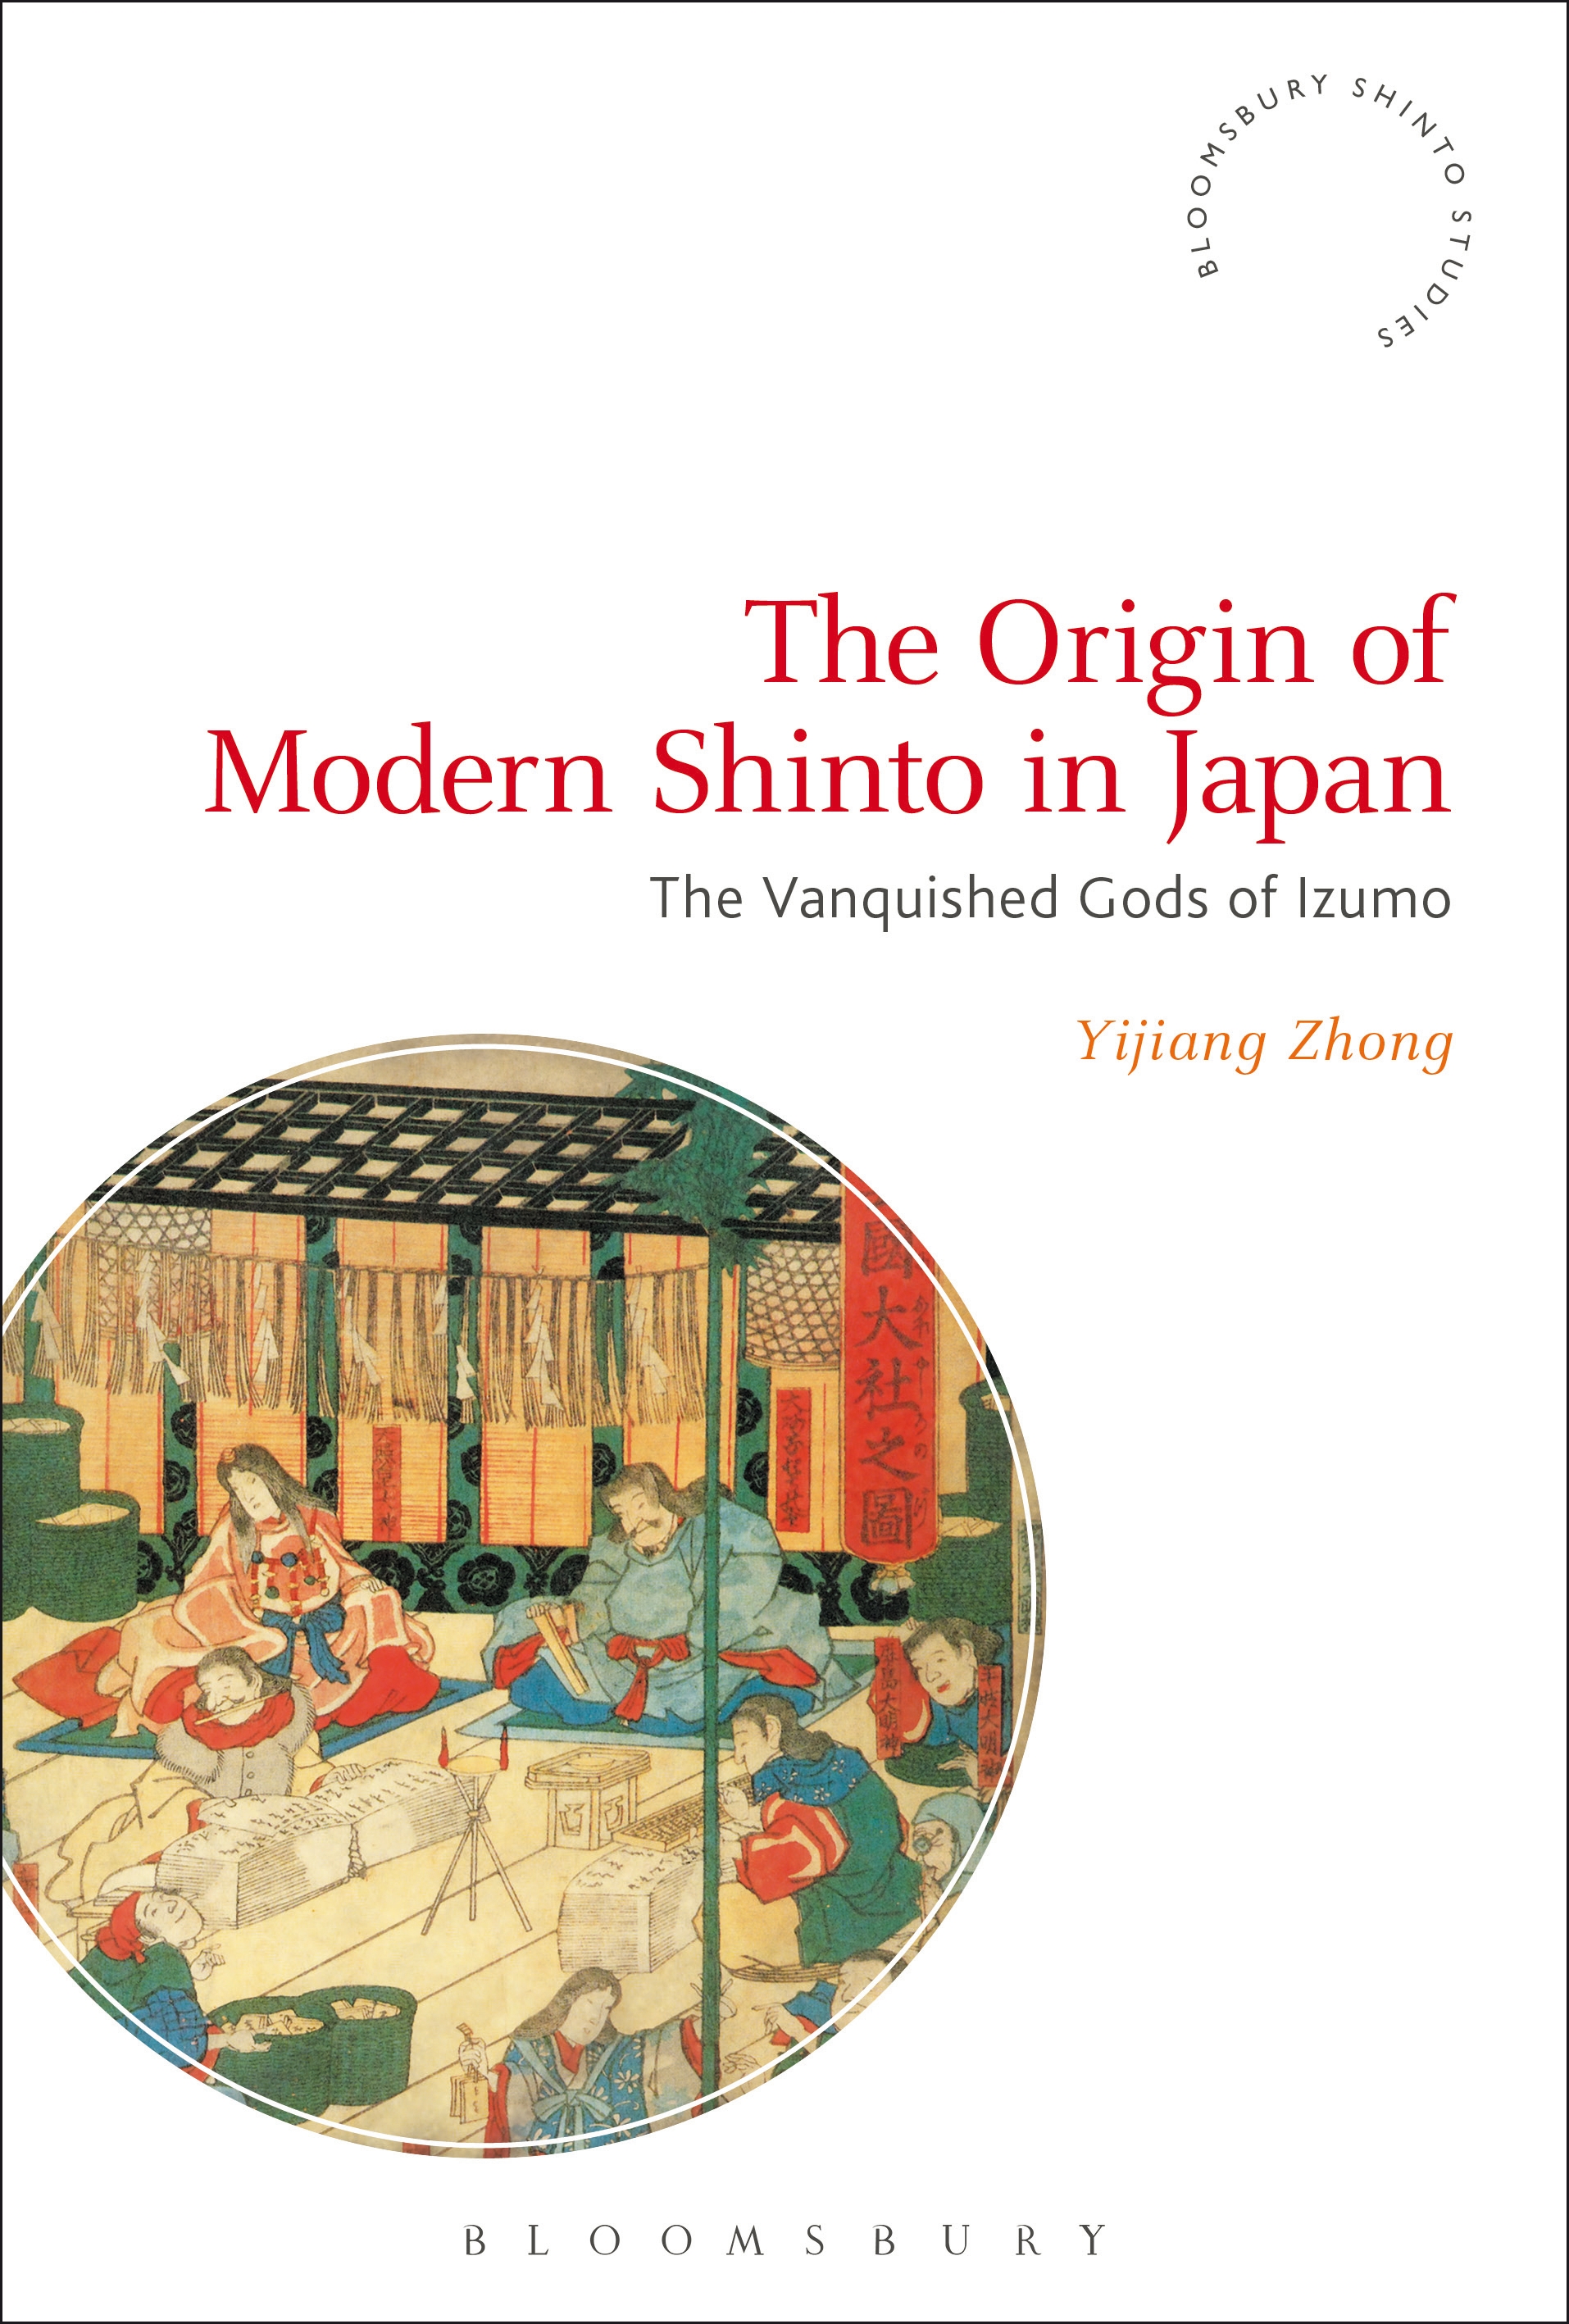 An Illustration of Shinto on a white cover